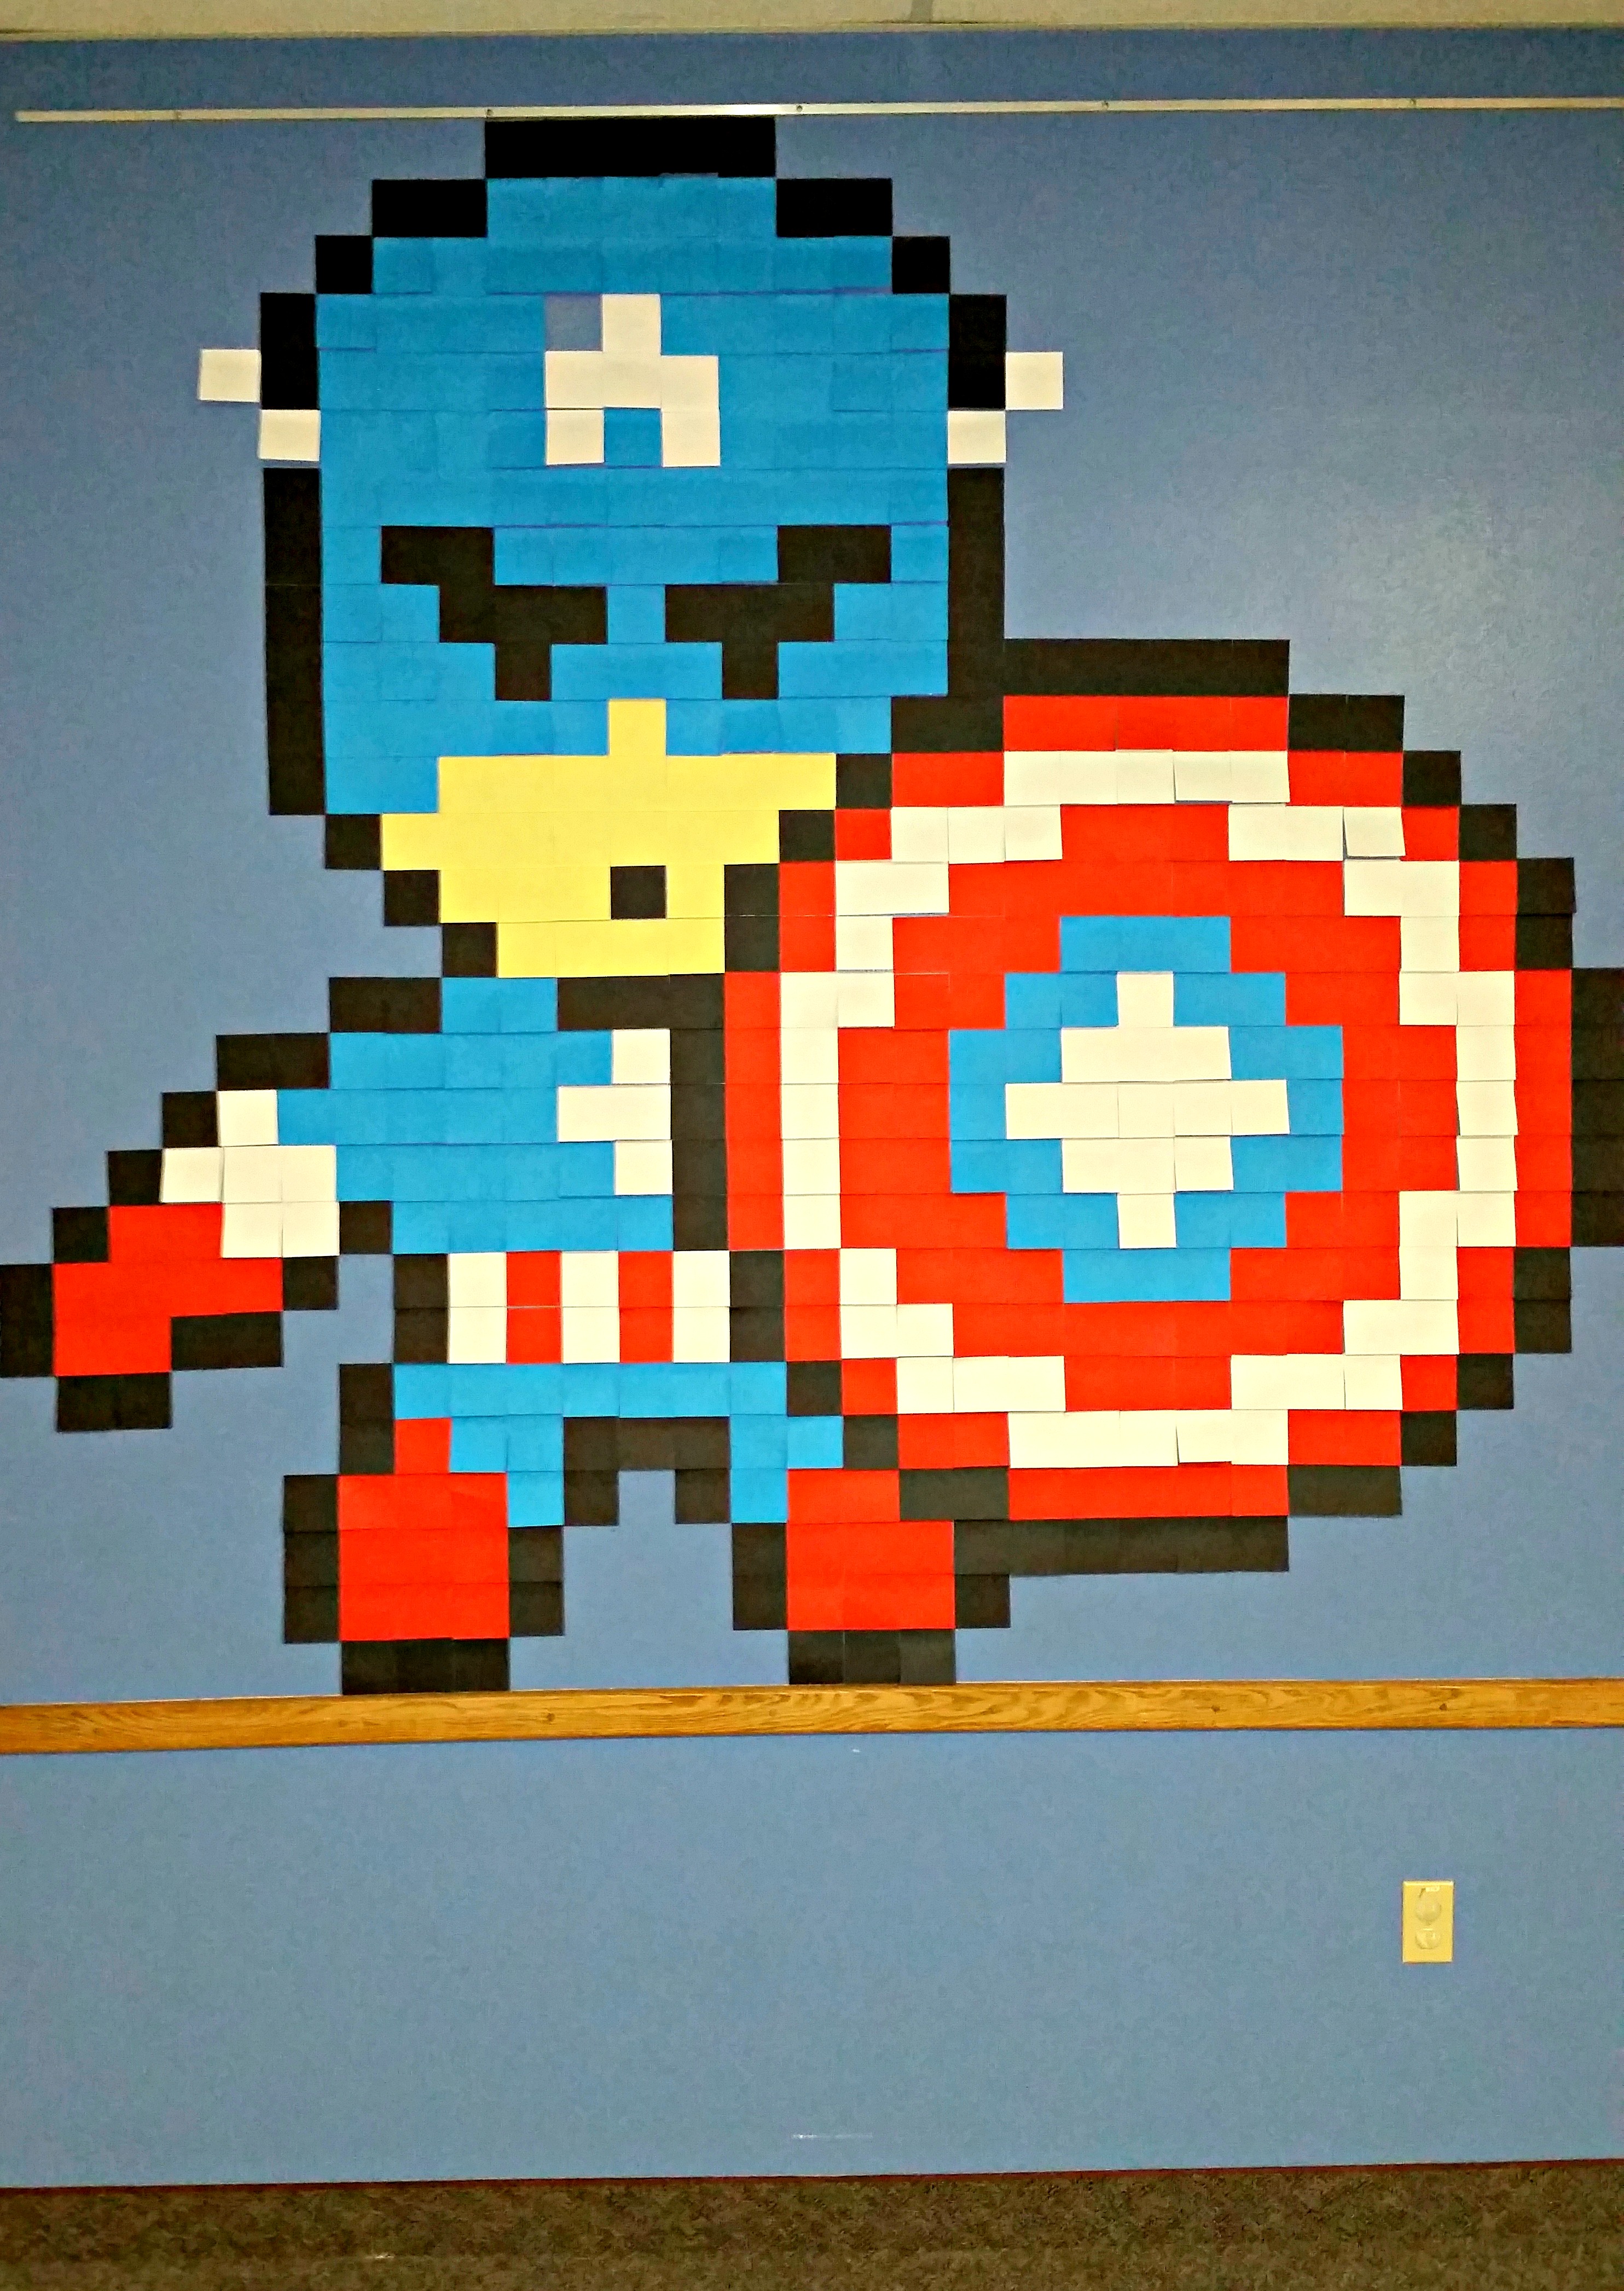 Post-it Note Captain America — Super fun display for your library, classroom or superhero party! #SRP2015  #Avengers